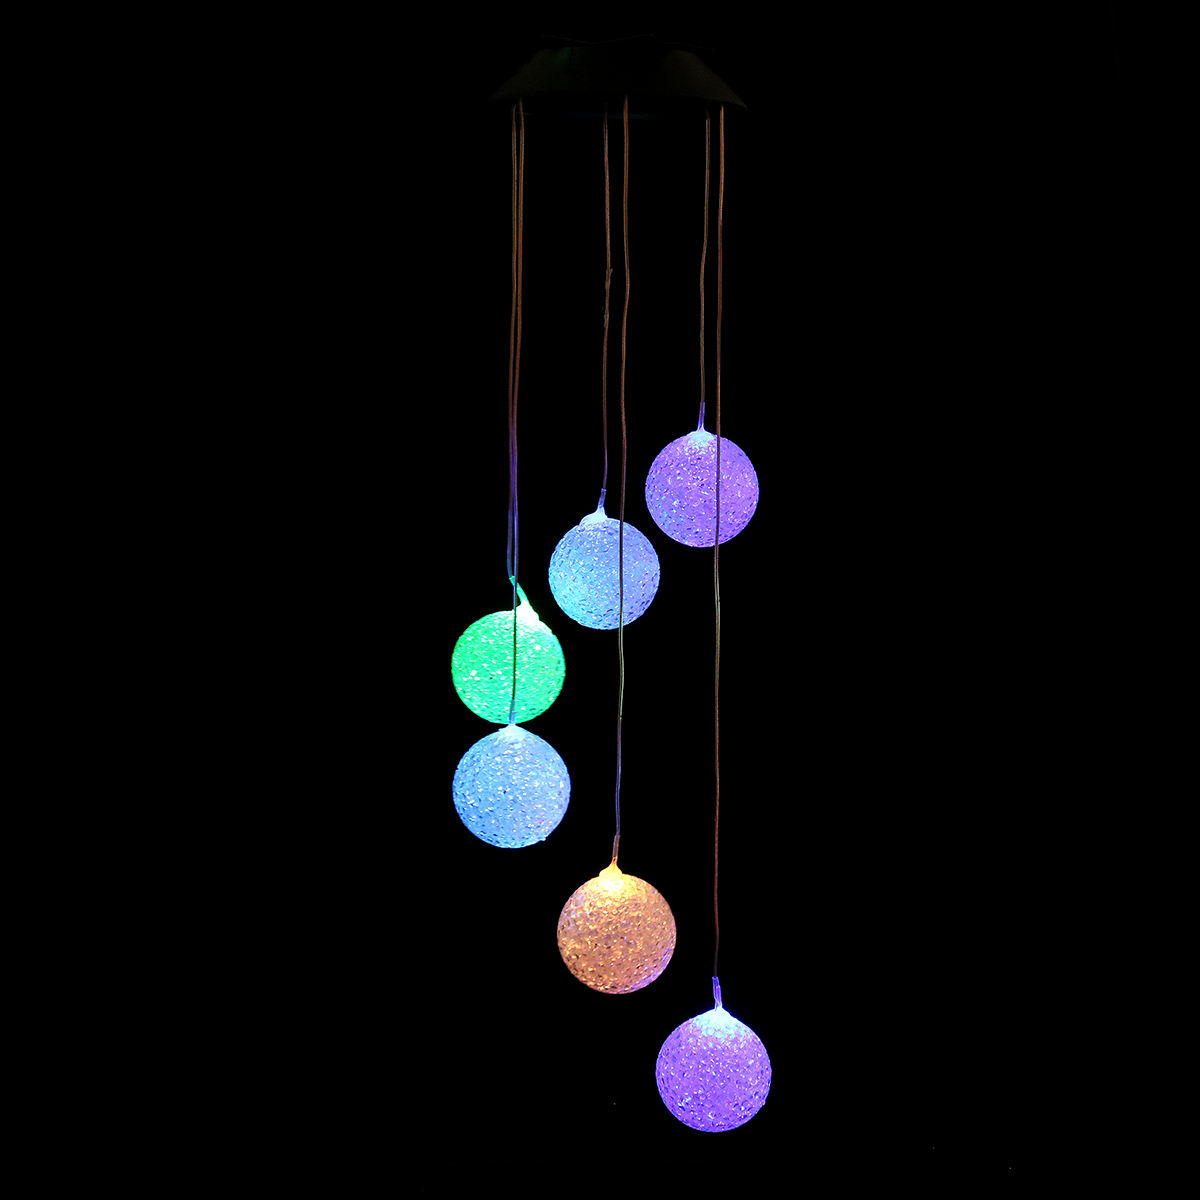 Color-Changing-LED-Solar-Powered-Wind-Chime-Light-Hanging-Garden-Yard-Decor-1760795-4